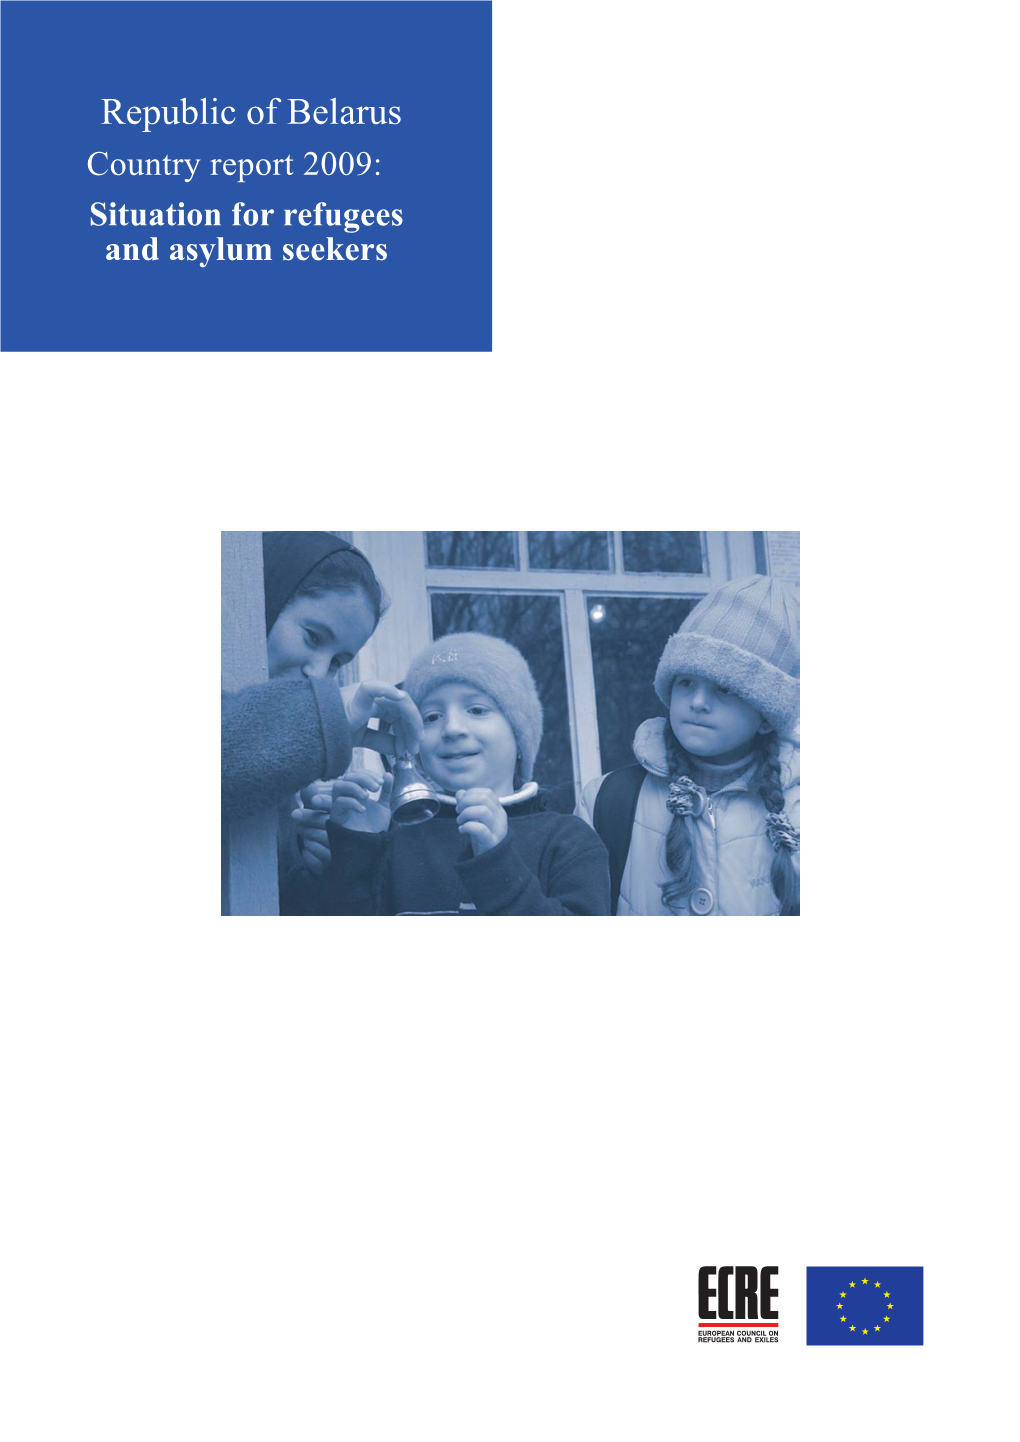 Republic of Belarus Country Report 2009: Situation for Refugees and Asylum Seekers